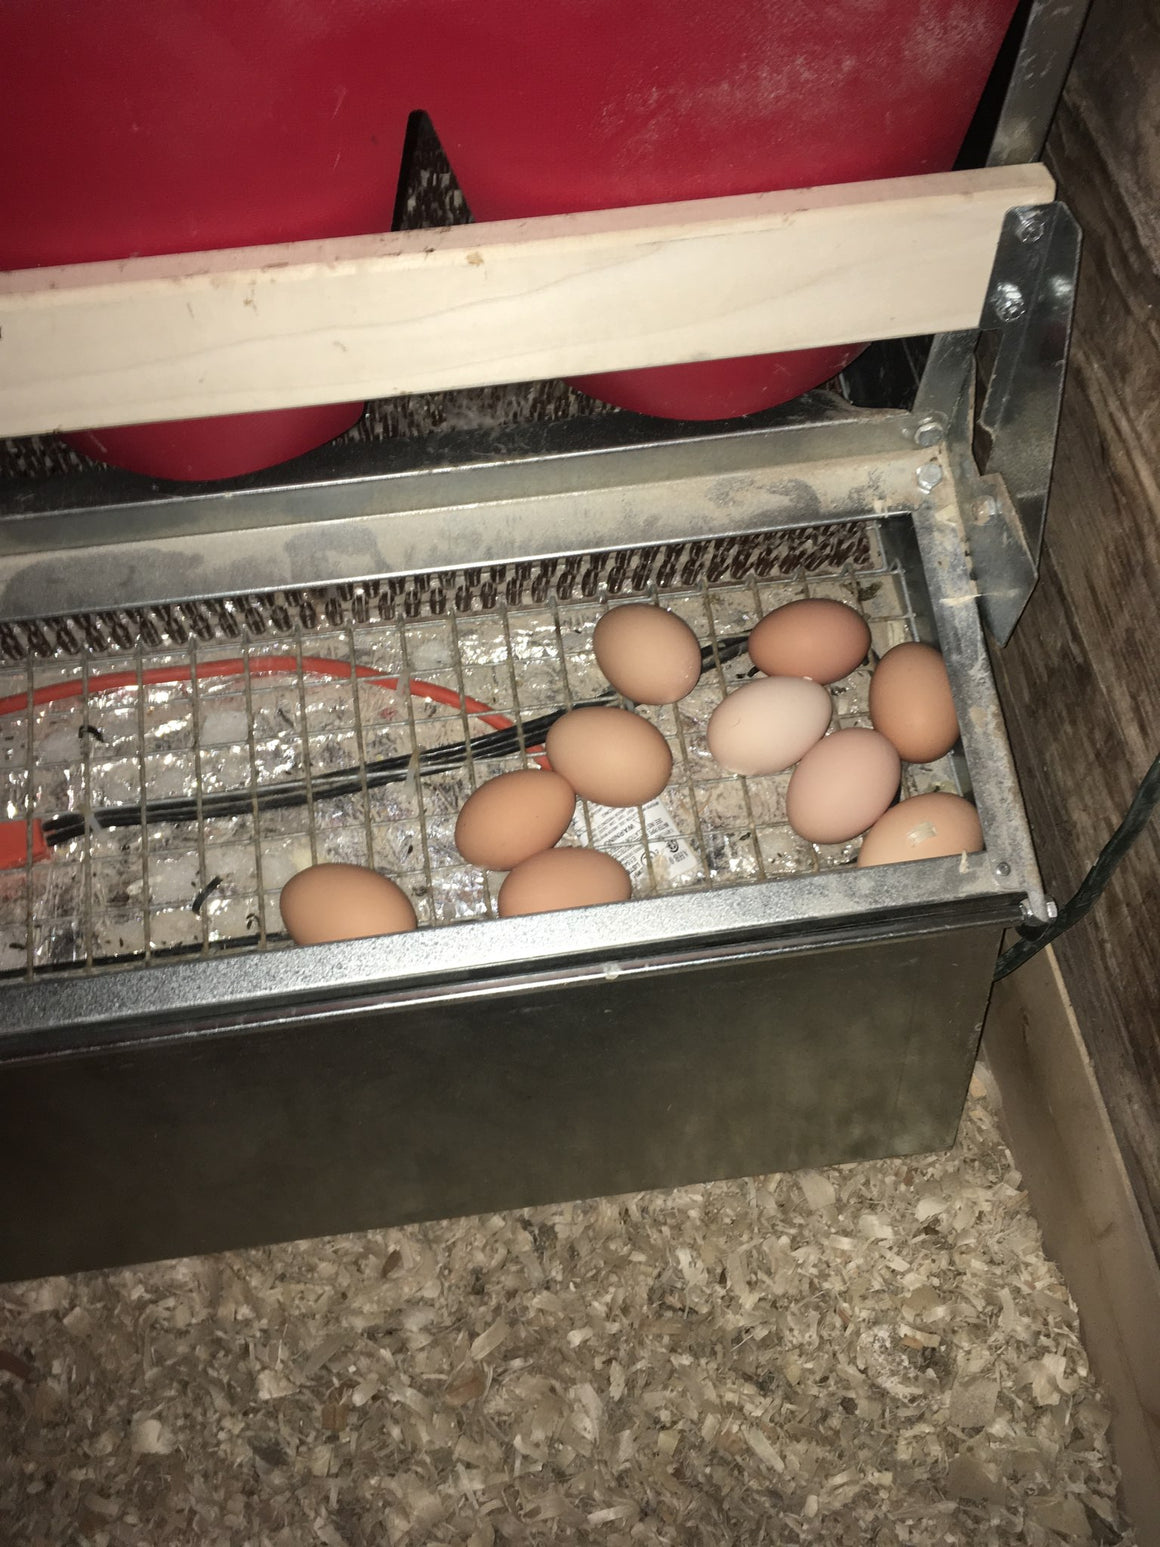 Heating solutions - Keep eggs from freezing